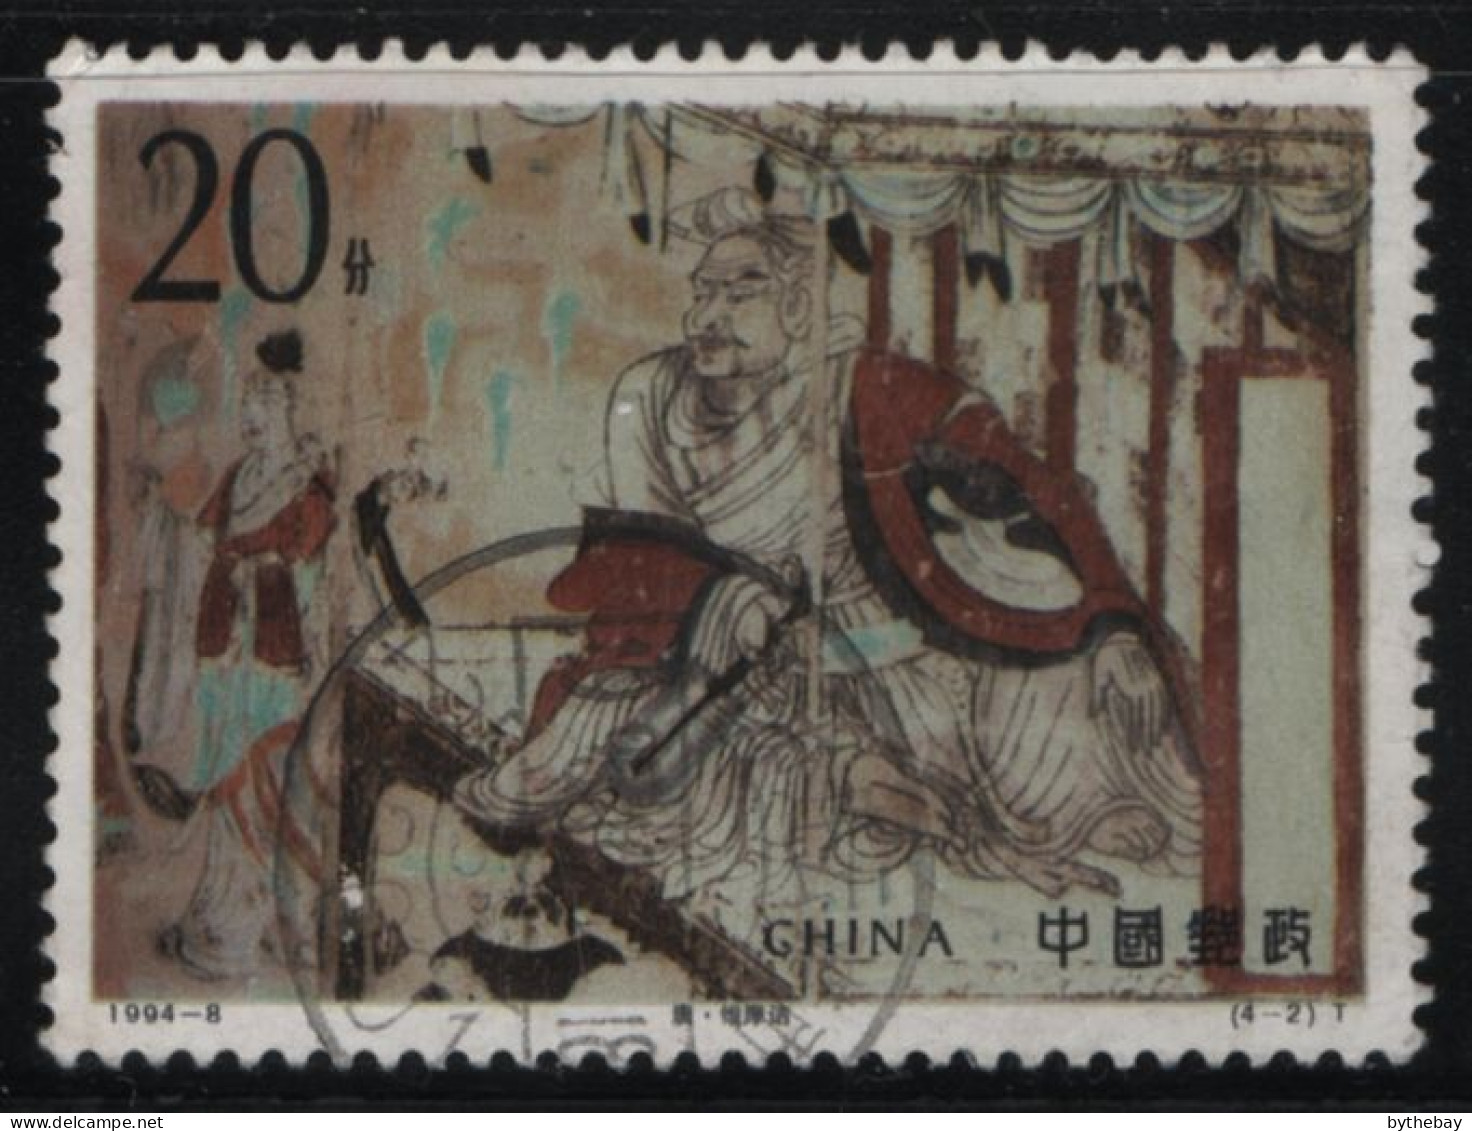 China People's Republic 1994 Used Sc 2506 20f Vimalakirti Wall Painting - Used Stamps